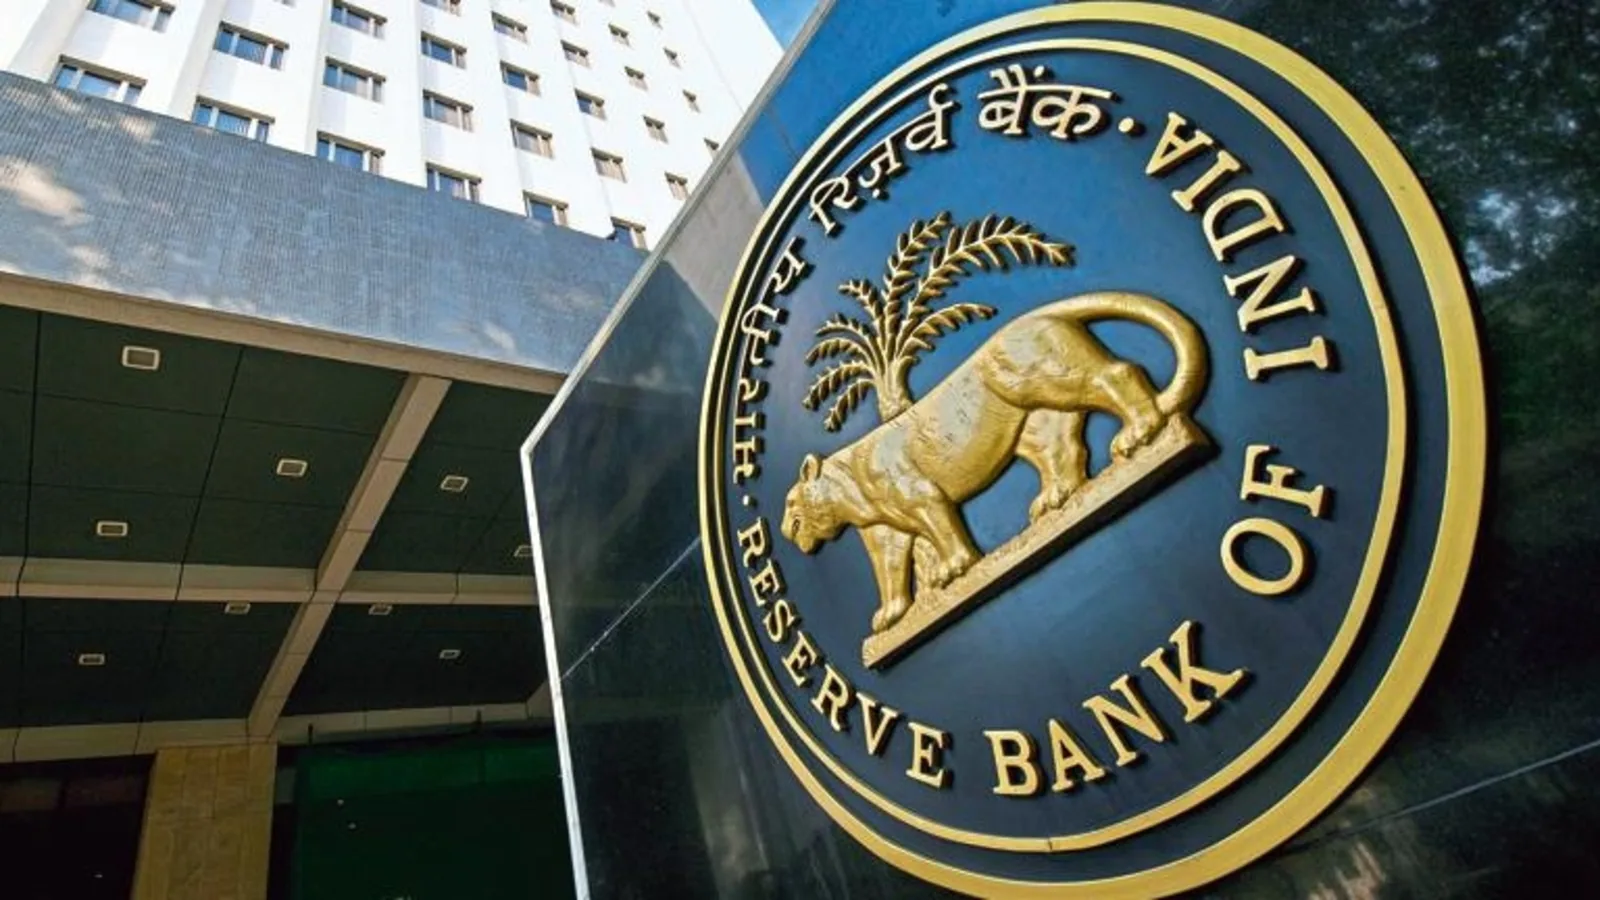 Number Theory: Need for caution in reading RBI’s Consumer Confidence Numbers